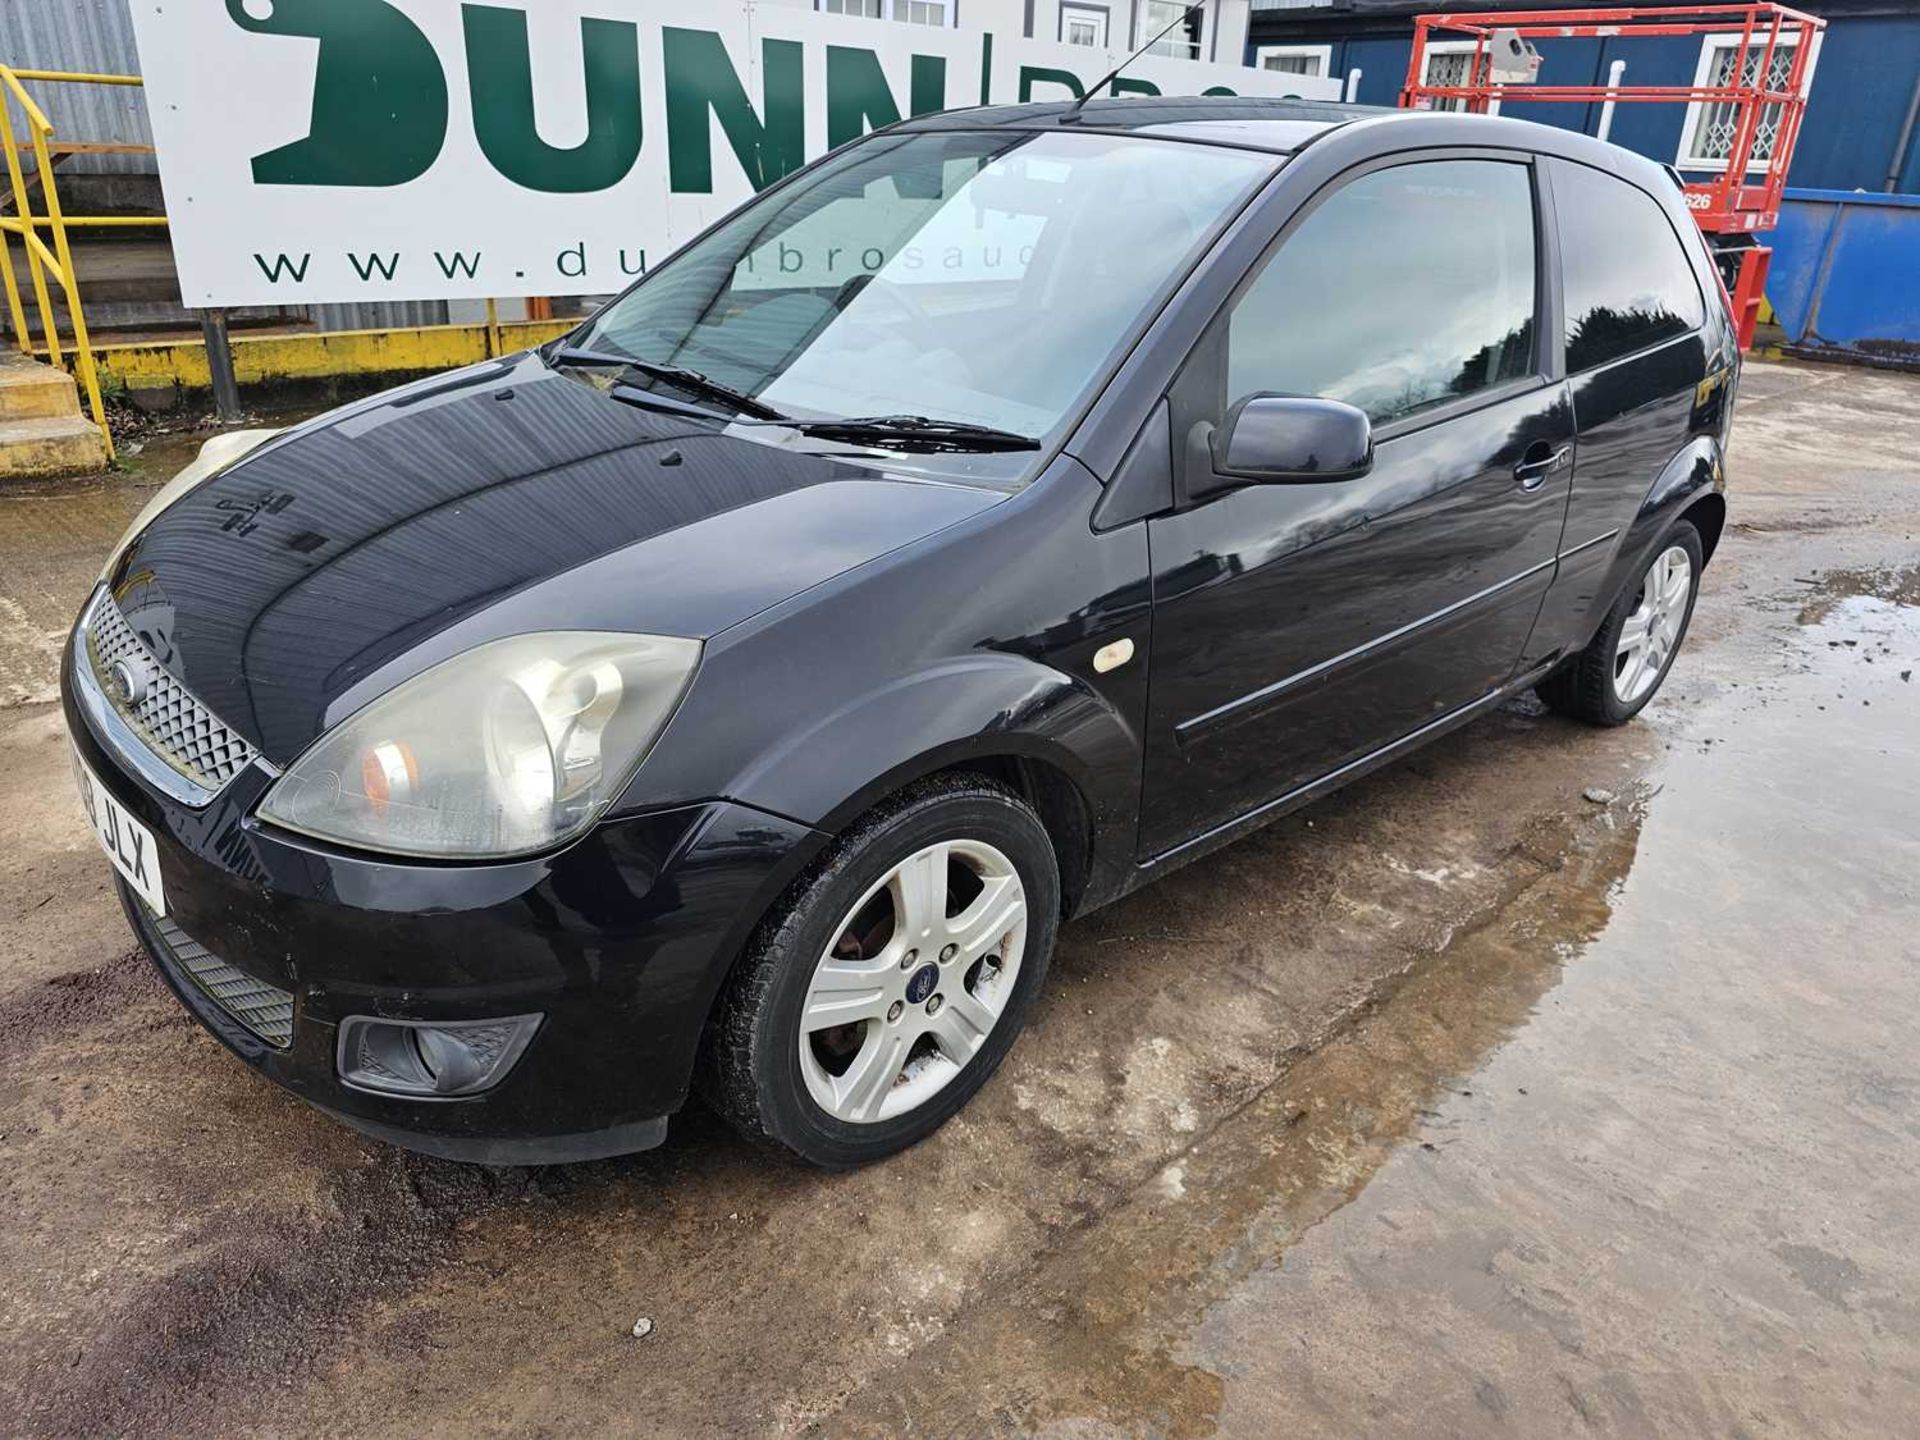 2008 Ford Fiesta Zetec Climate, 5 Speed, A/C (Reg. Docs. Available)